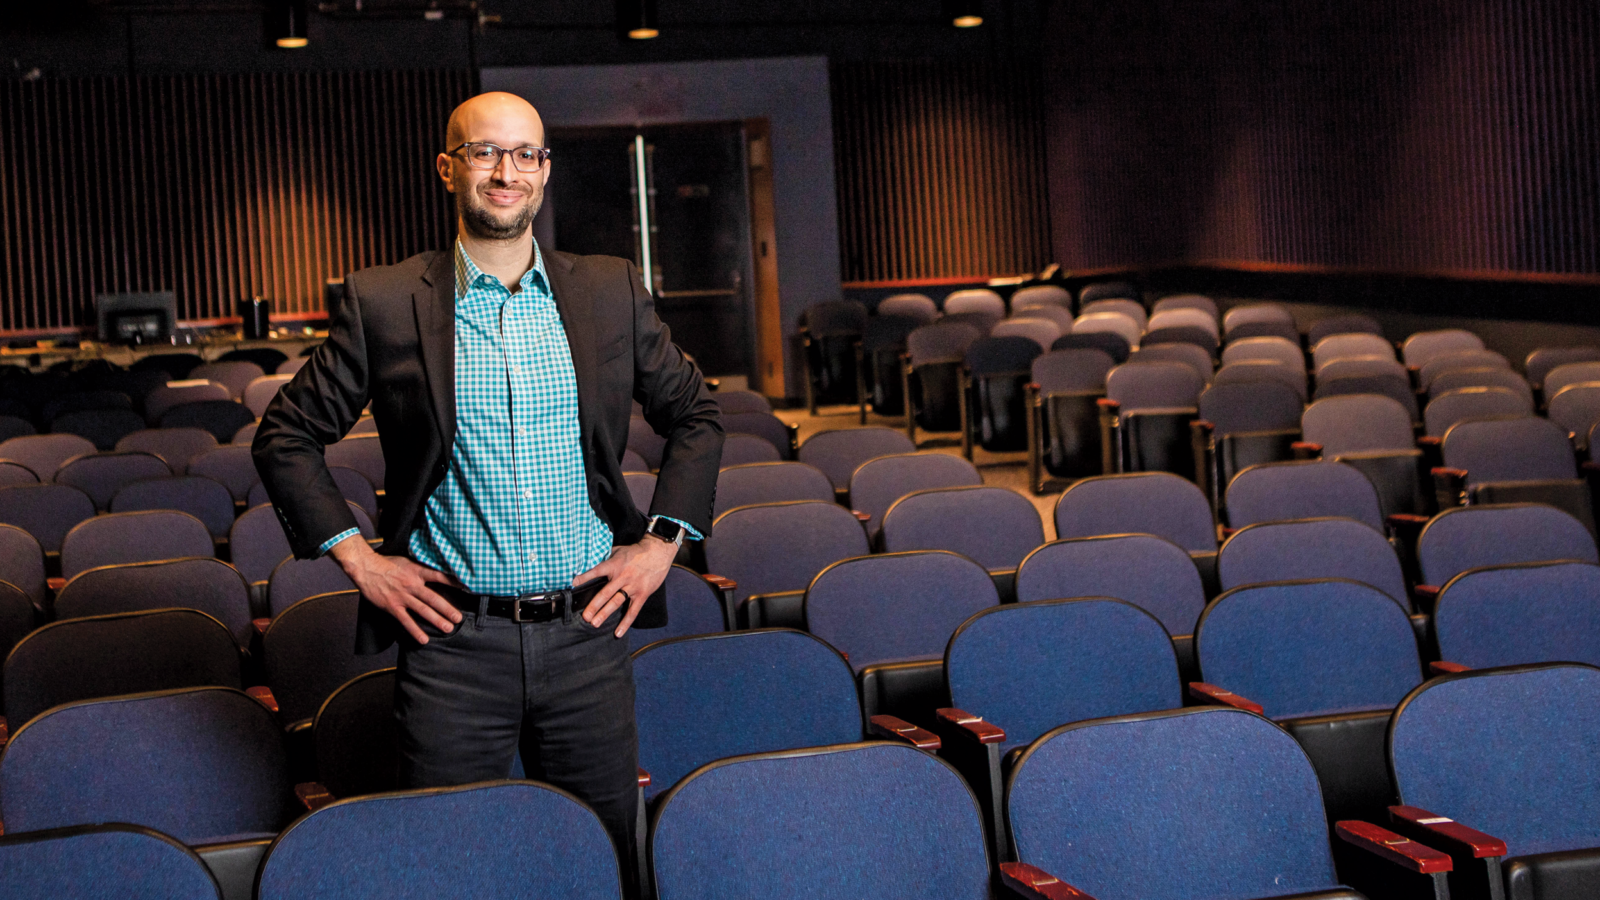 man standing in row of seats in theater